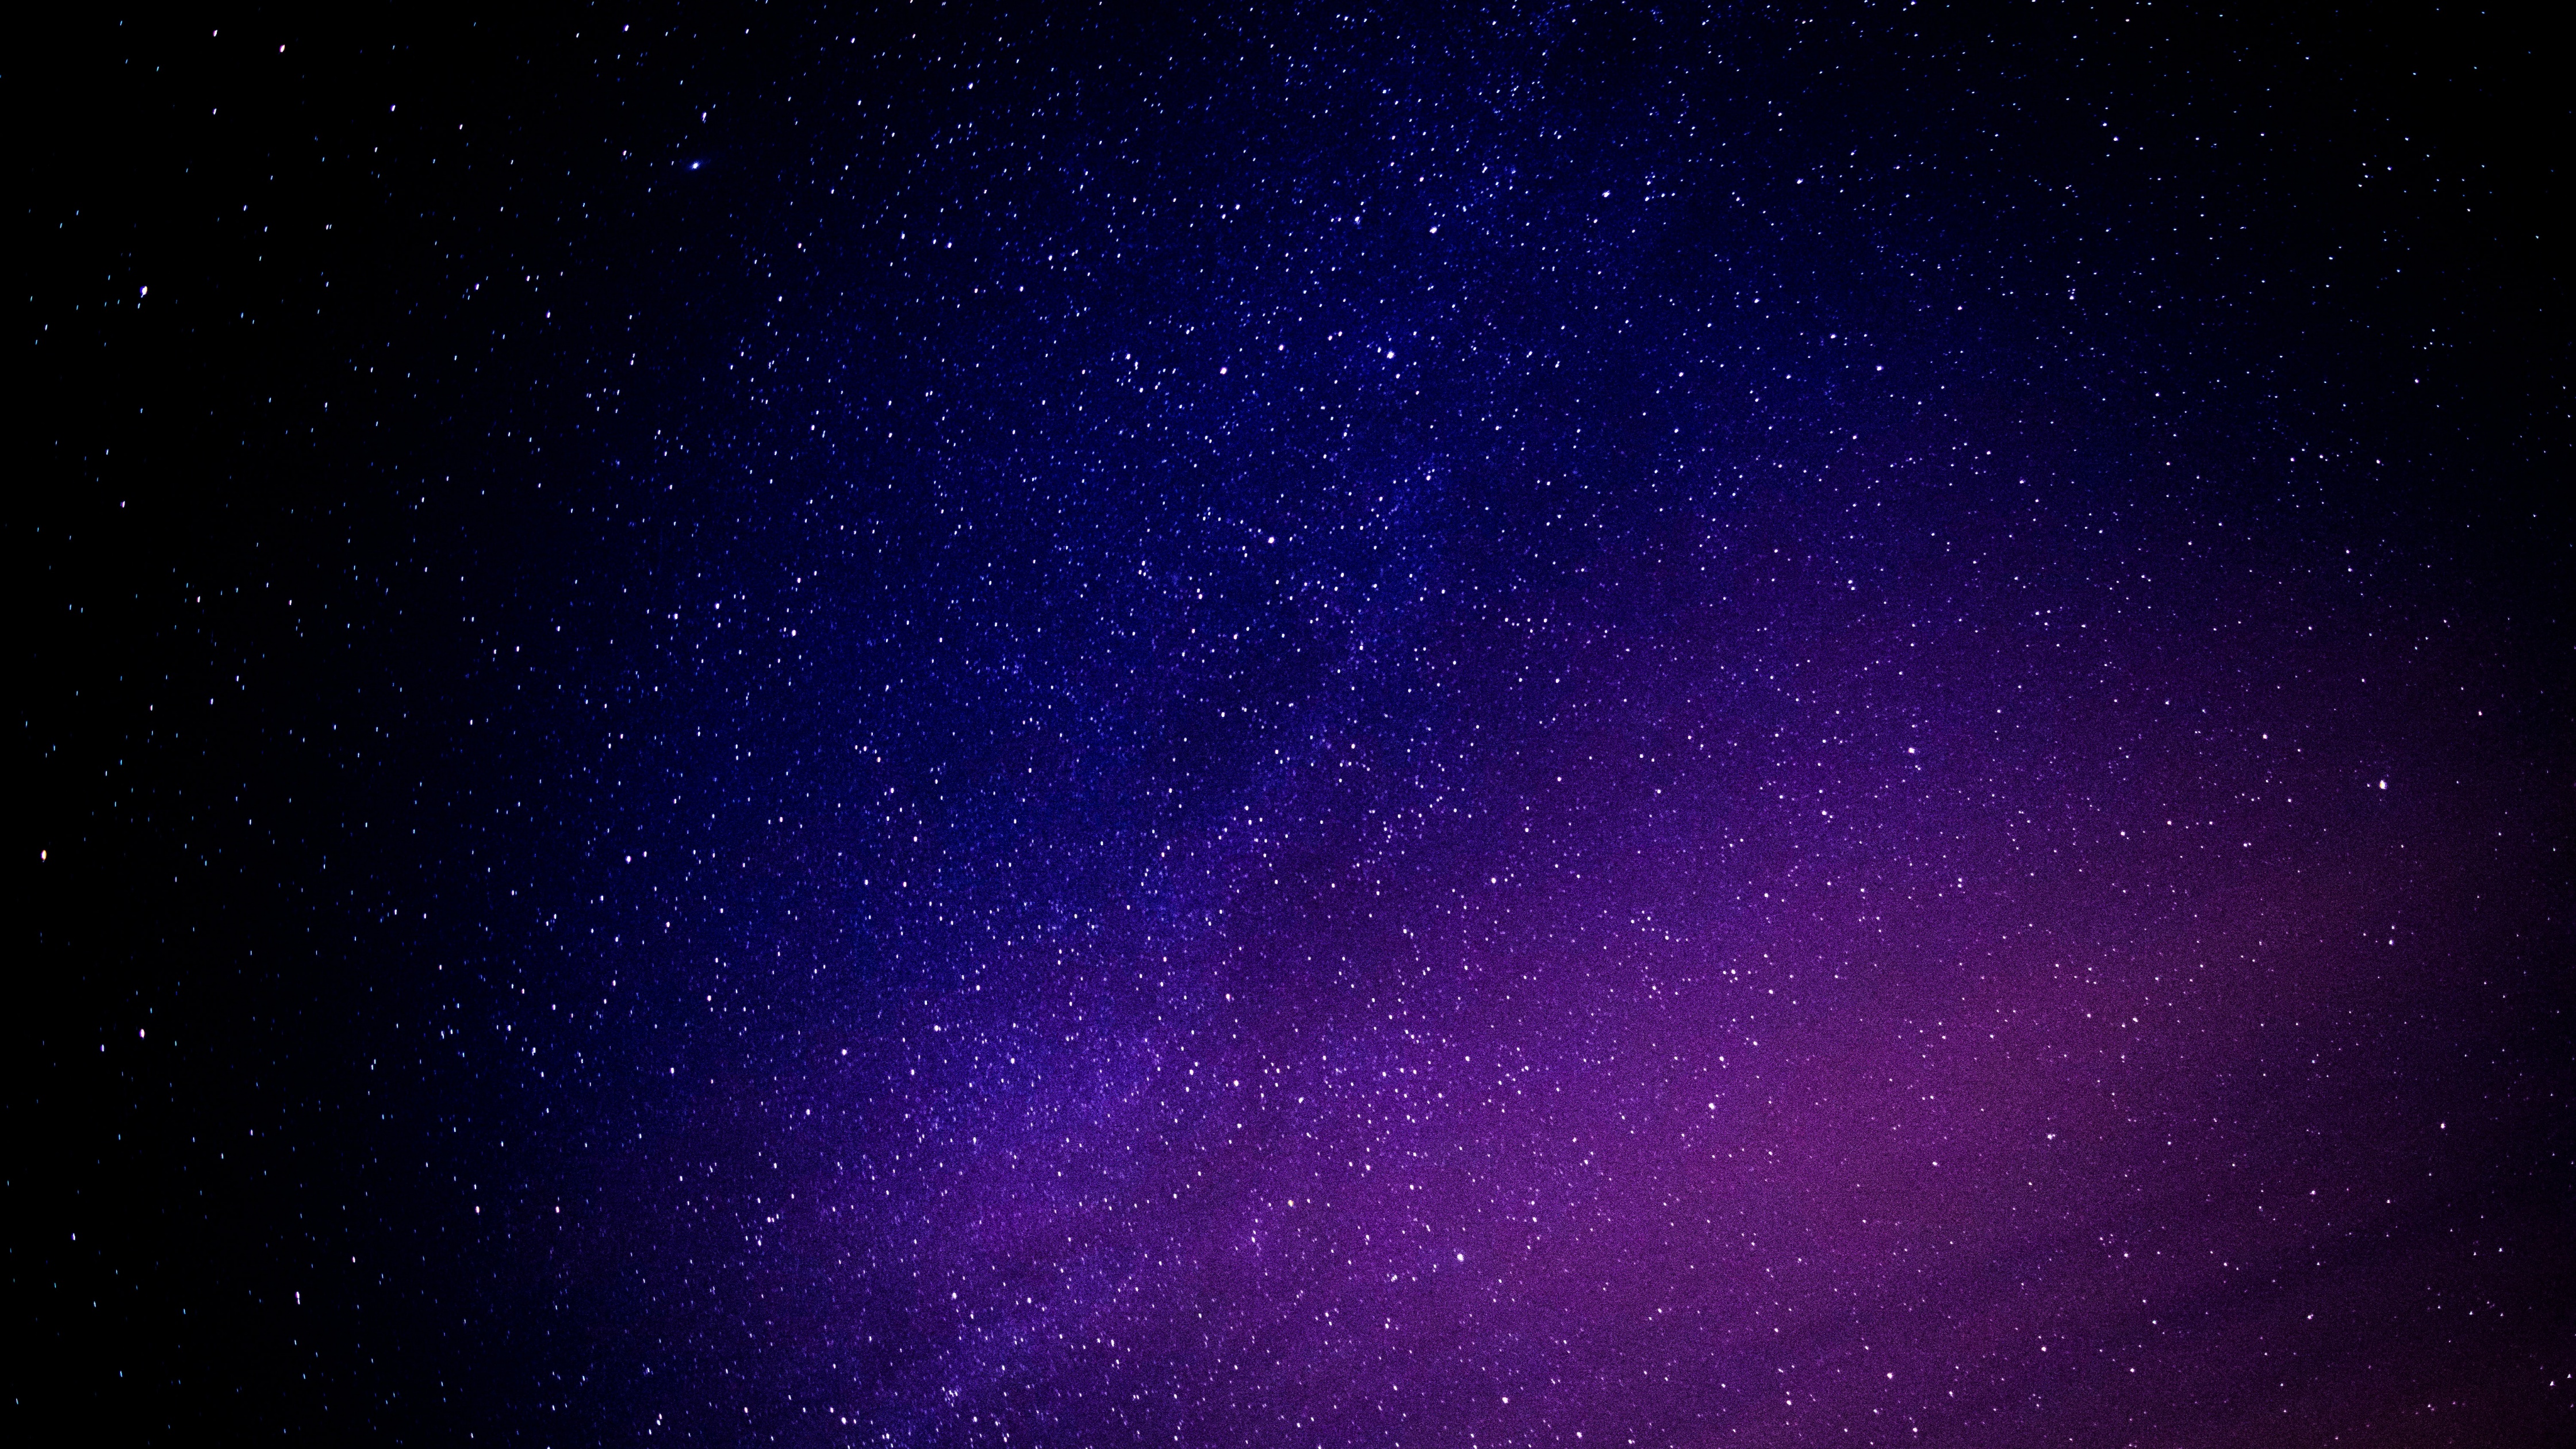 100+ Night Sky Pictures | Download Free Images & Stock Photos on Unsplash